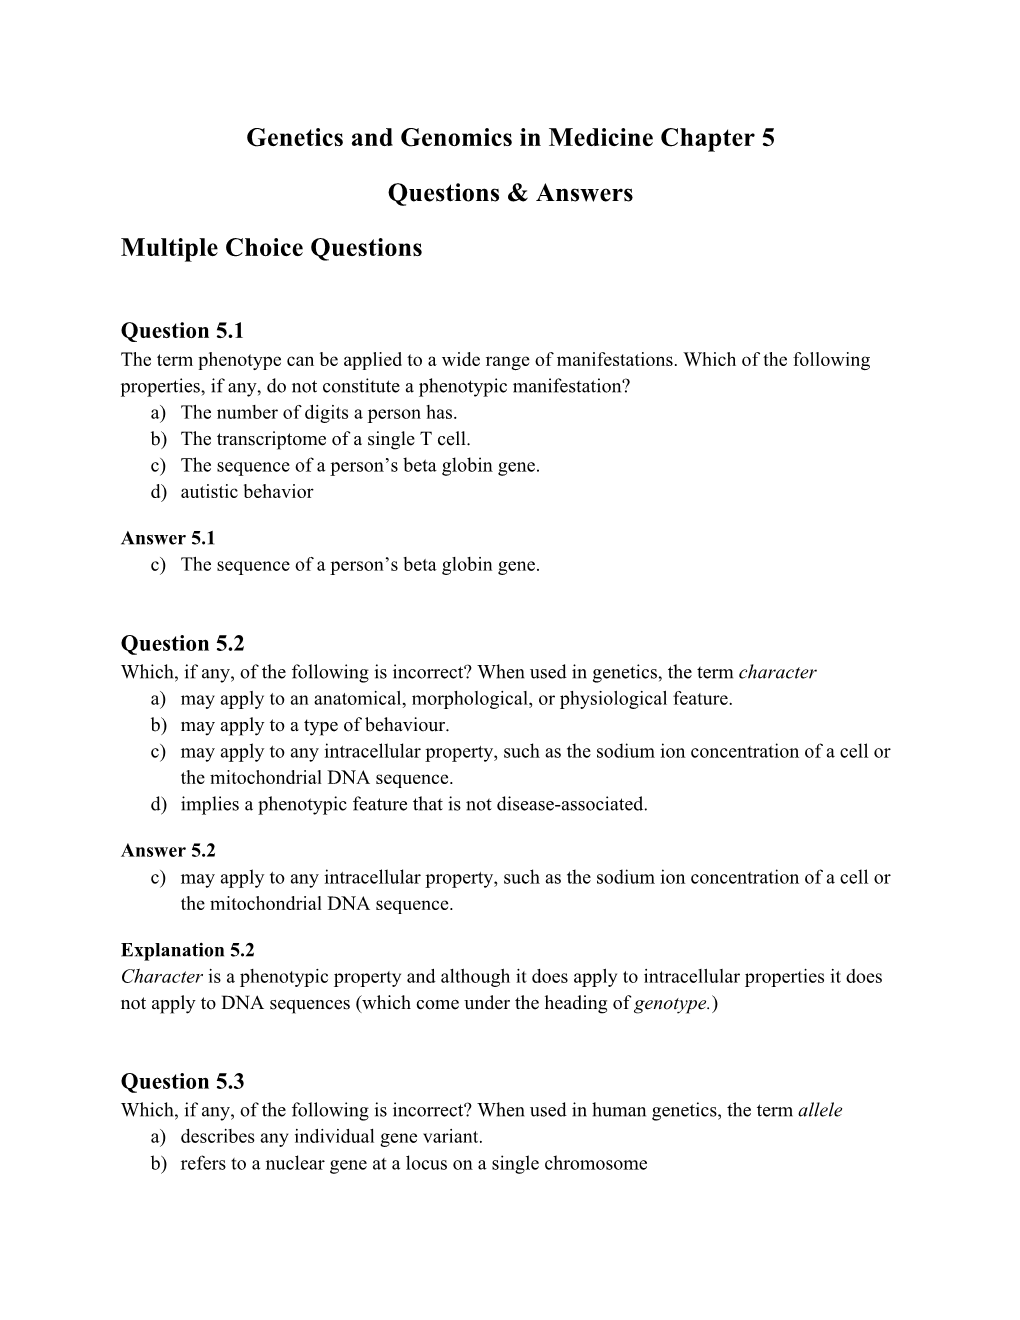 Genetics and Genomics in Medicine Chapter 5 Questions & Answers